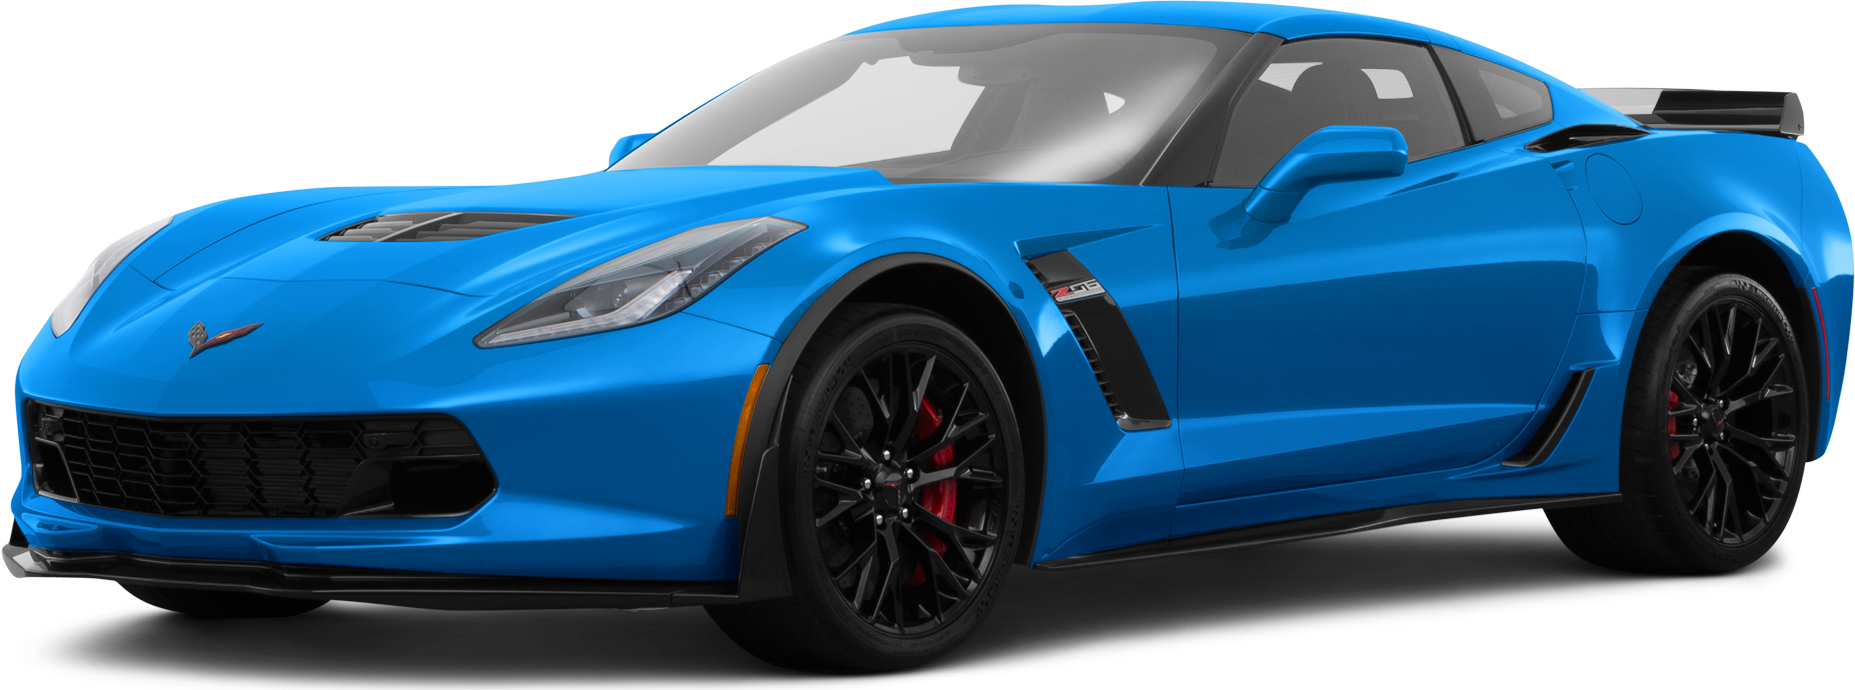 2016 Chevrolet Corvette Price Value Ratings And Reviews Kelley Blue Book